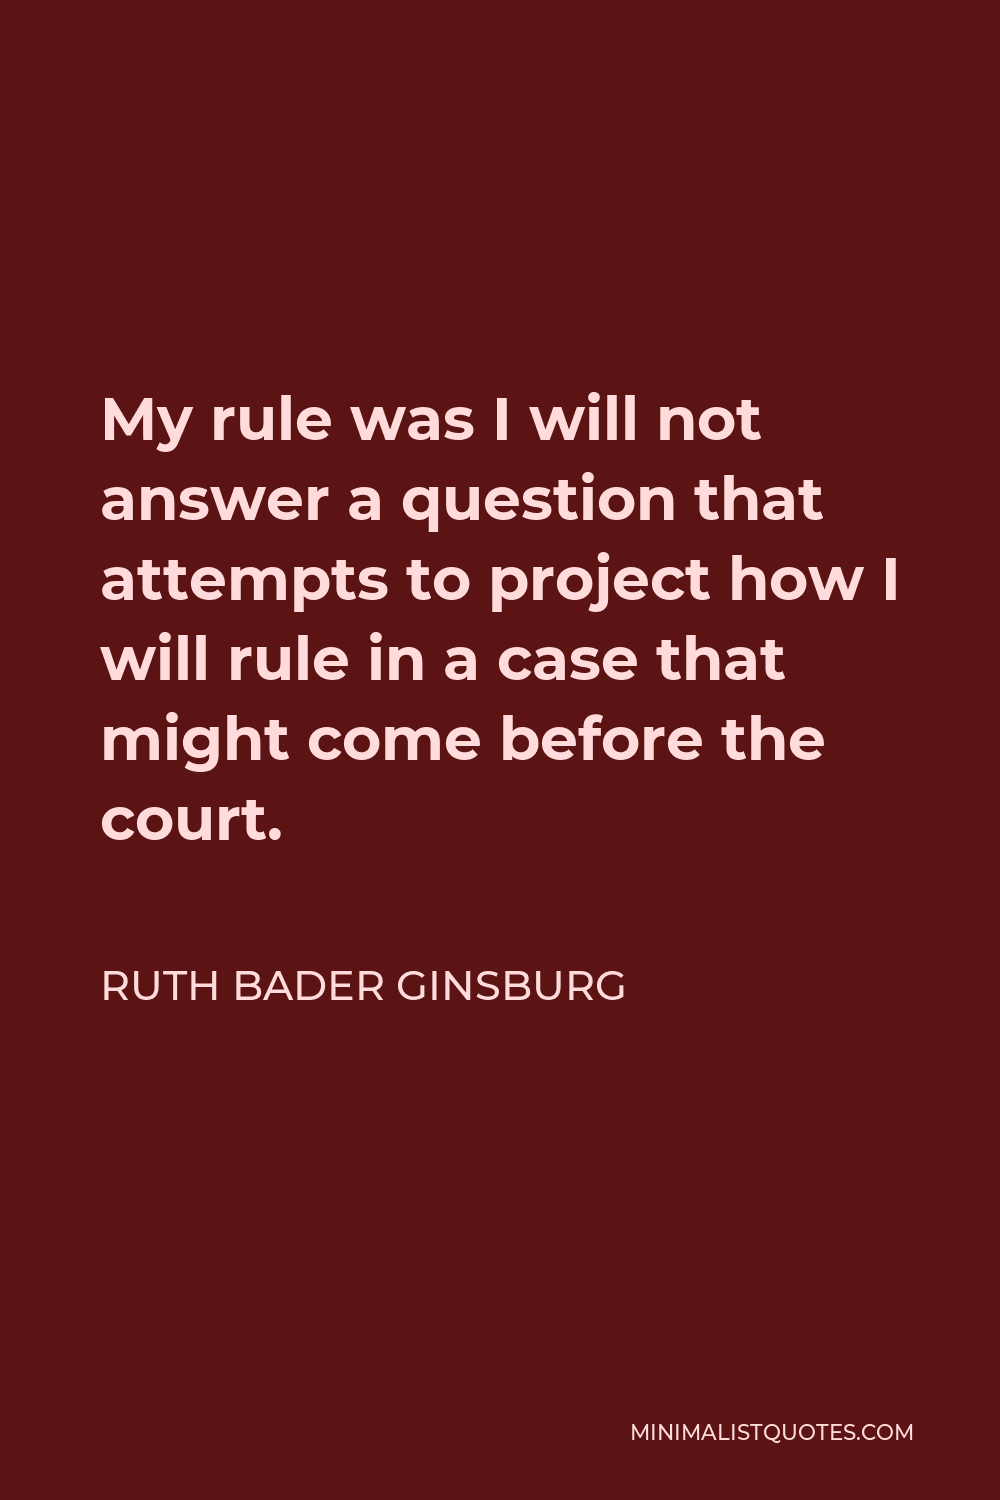 Ruth Bader Ginsburg Quote - My rule was I will not answer a question that attempts to project how I will rule in a case that might come before the court.